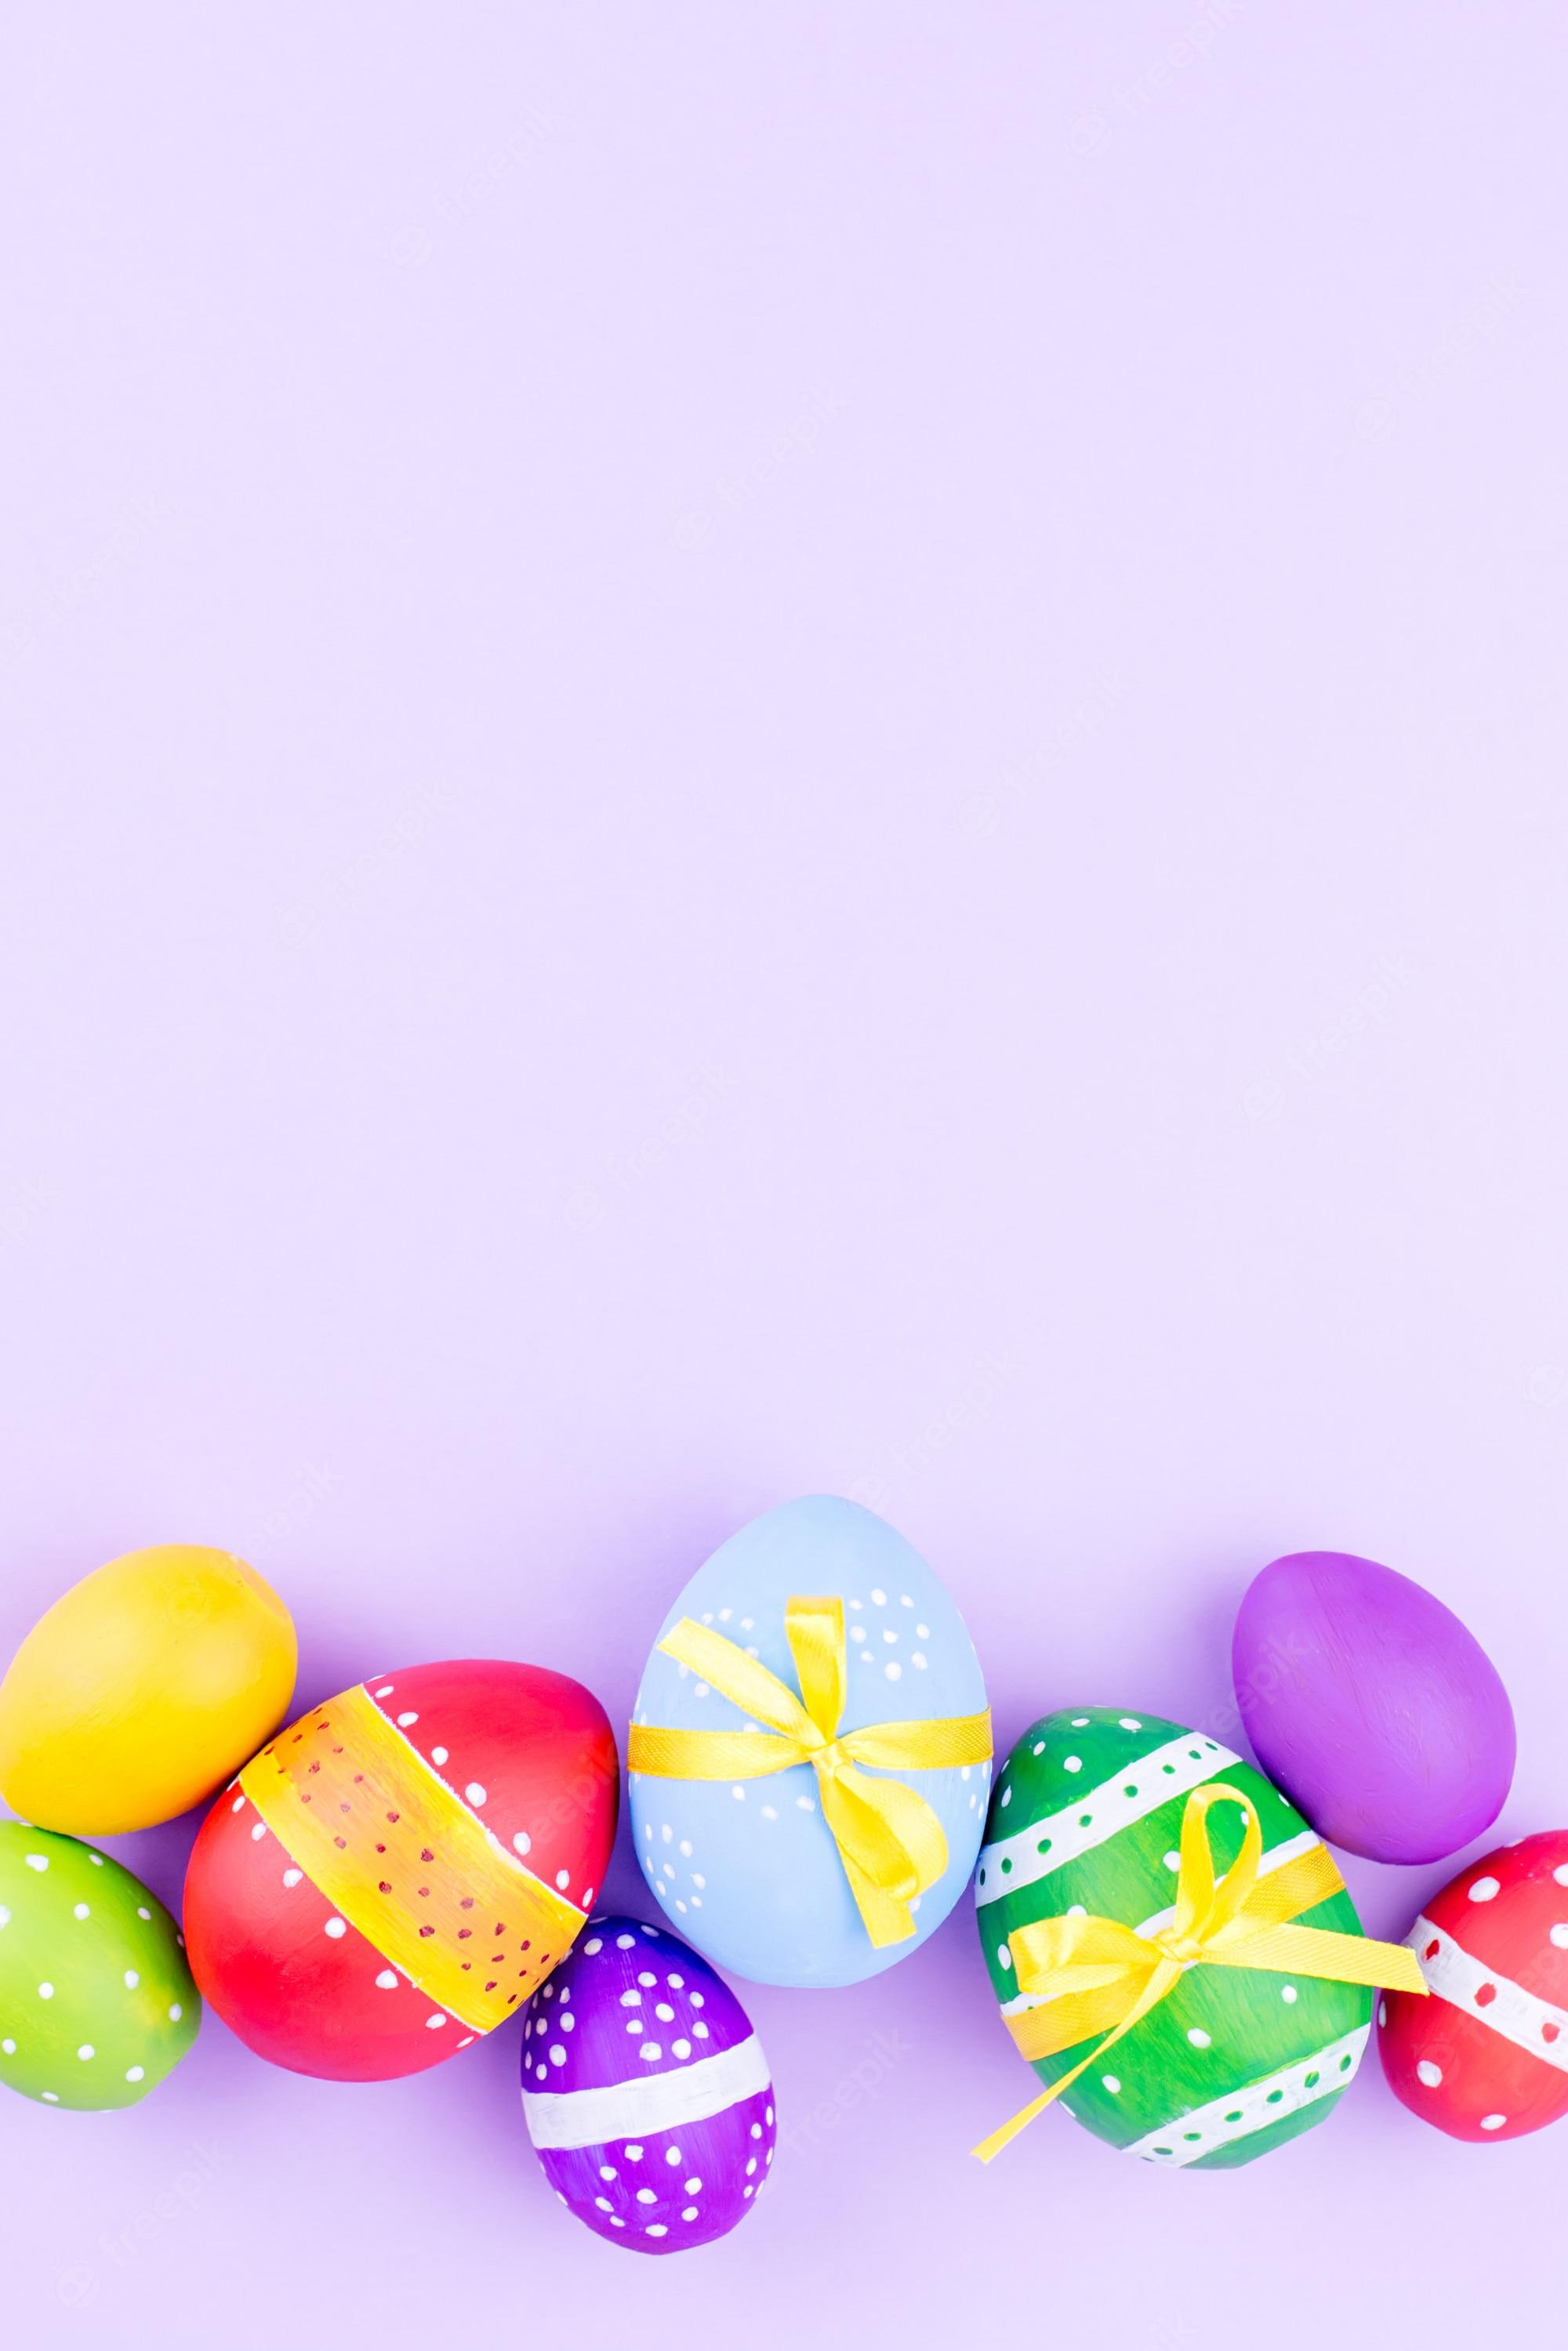 Premium Photo Colorful Easter Eggs On Pastel Purple Background